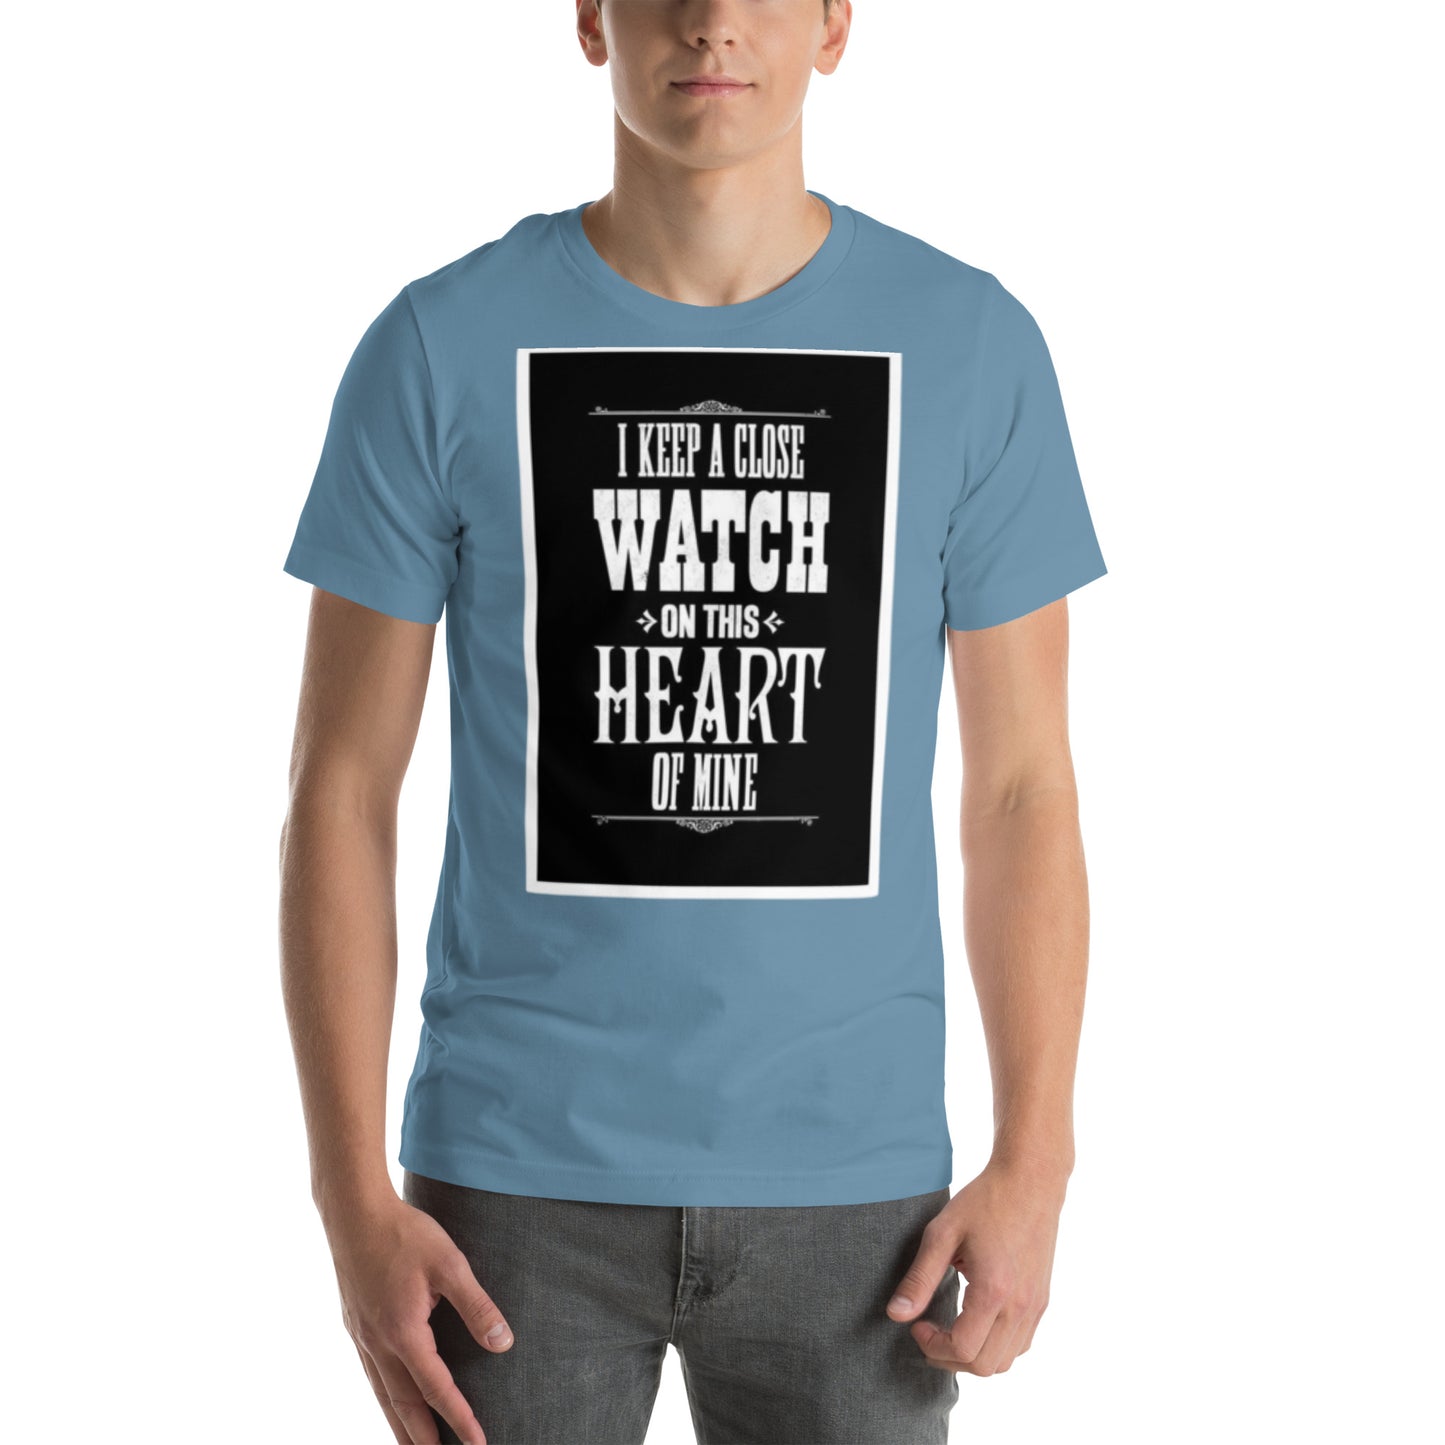 Close Watch - Get Your Twang On with Classic Country Tees - The Ultimate Unisex T-Shirt for True Country Souls! - Classic Country Tees